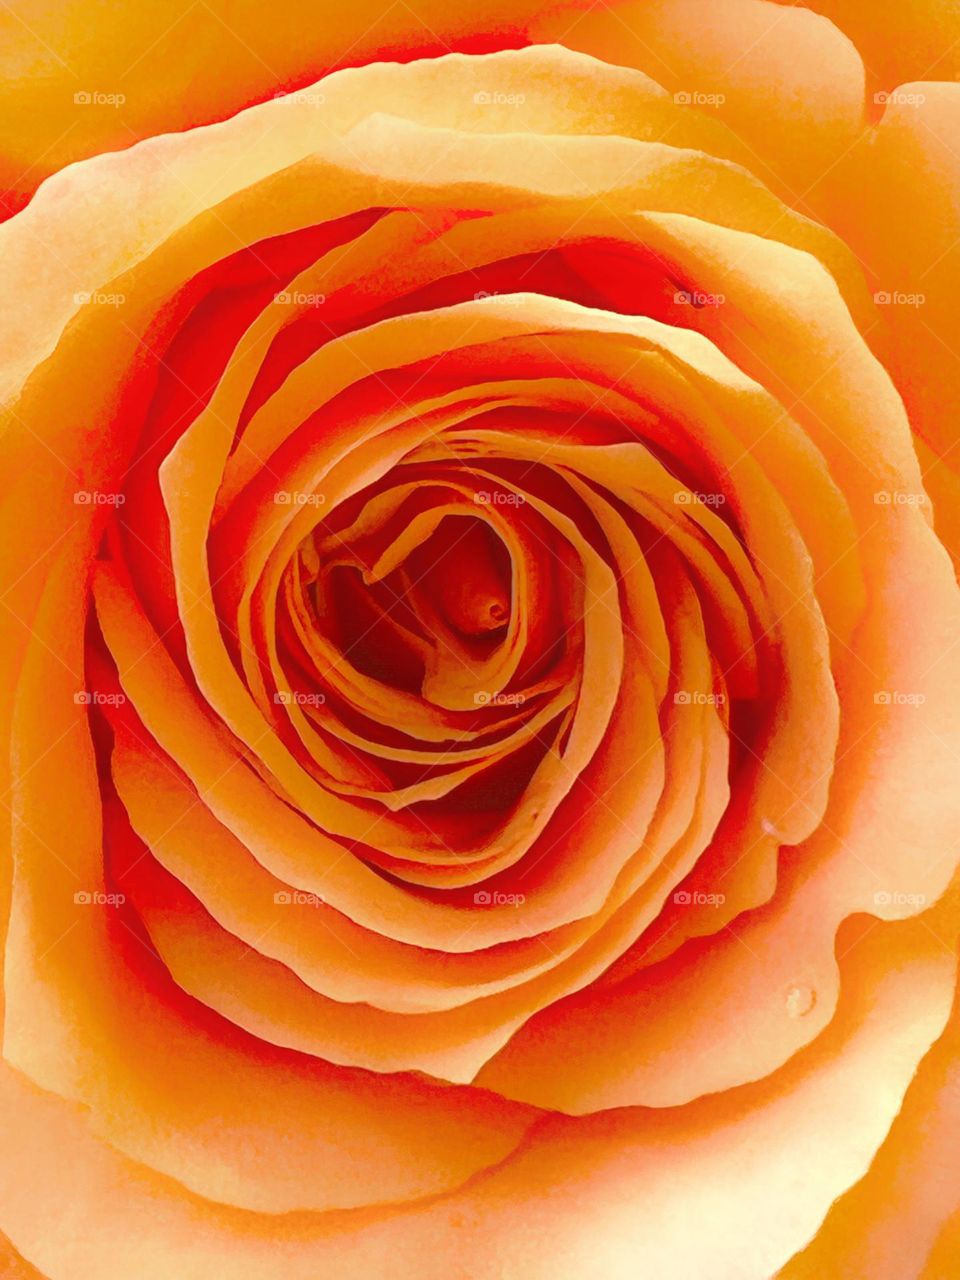 Season of blossome: rose - the perfect shape 